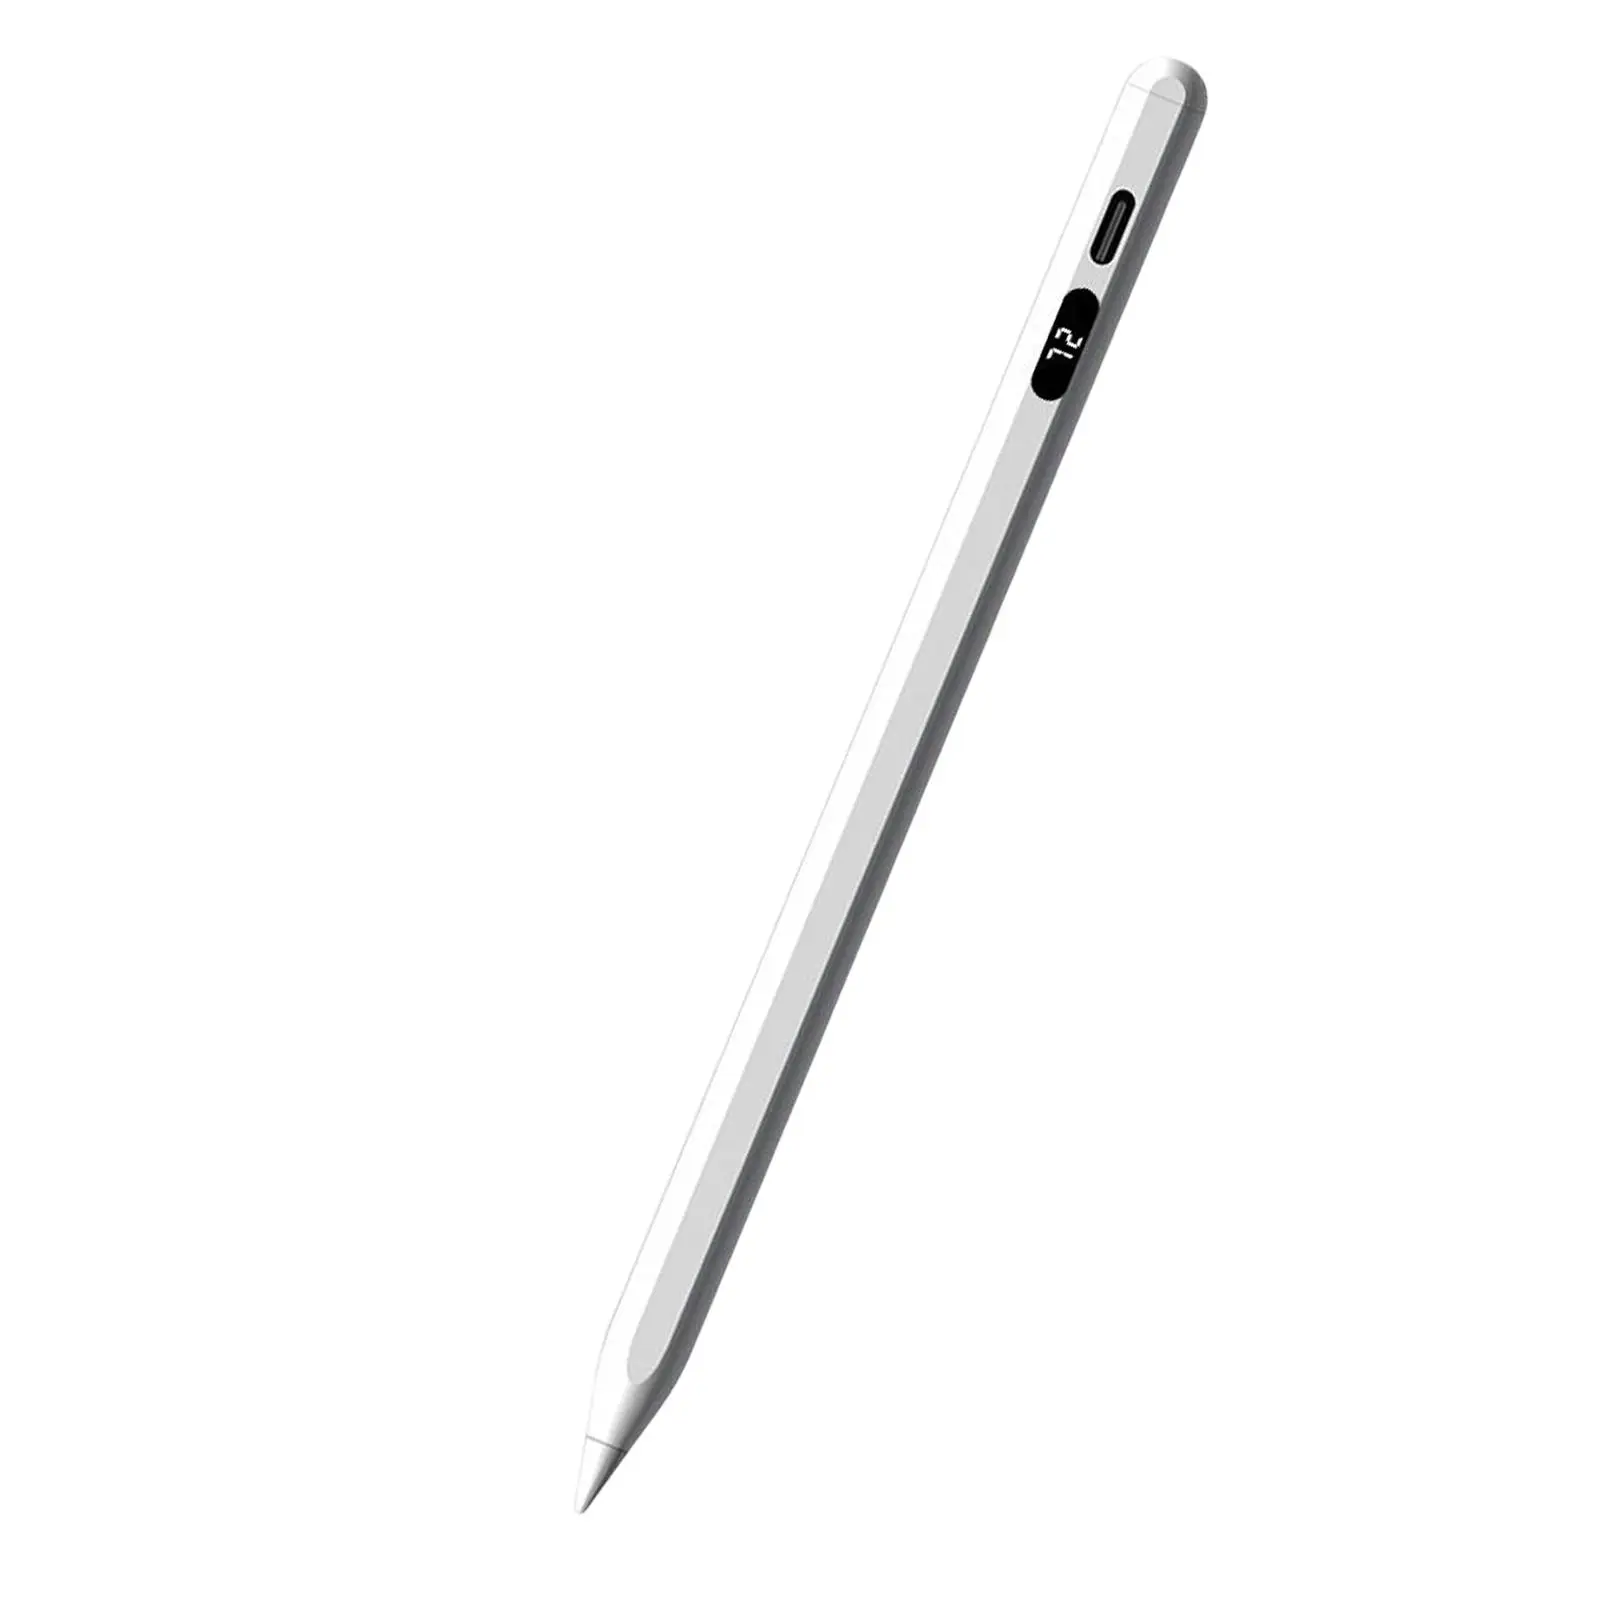 Stylus Pen Universal Handwriting Ultra Fine Tip Battery Digital Display Capacitive Pen for Tablets Tilting Detection Cell Phones